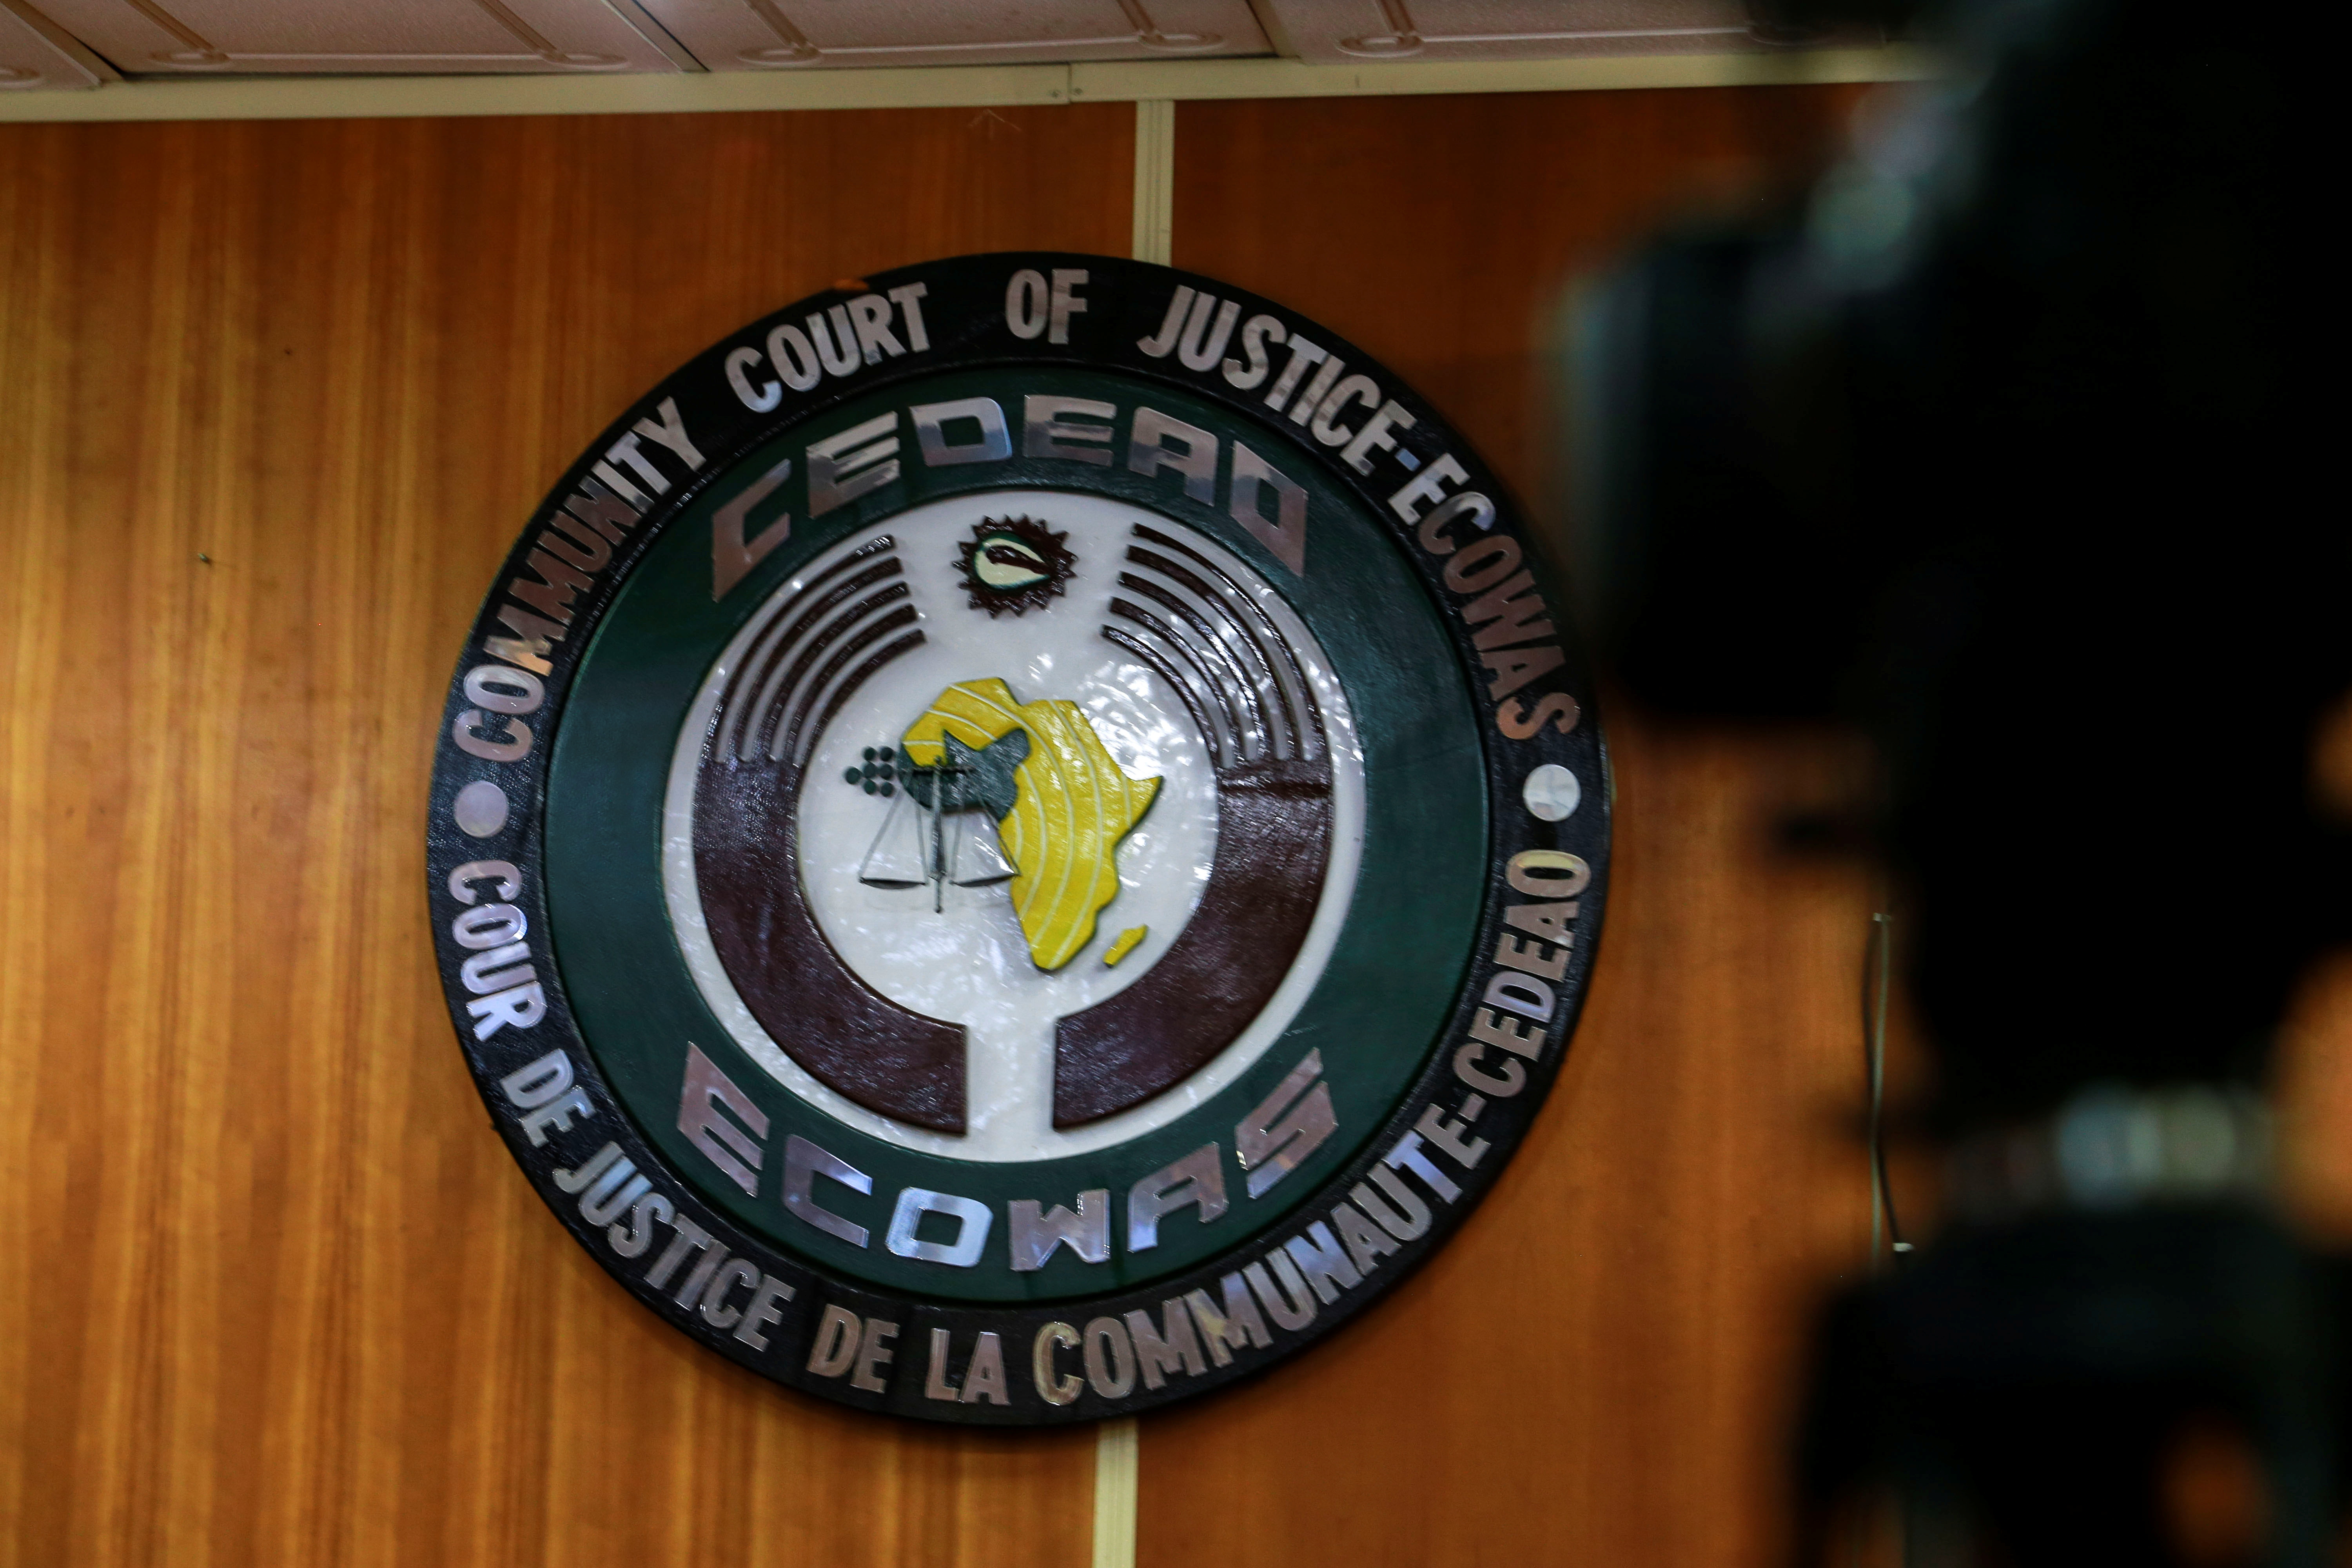 Ecowas court hearing on whether Nigeria's Twitter ban violated rights, in Abuja